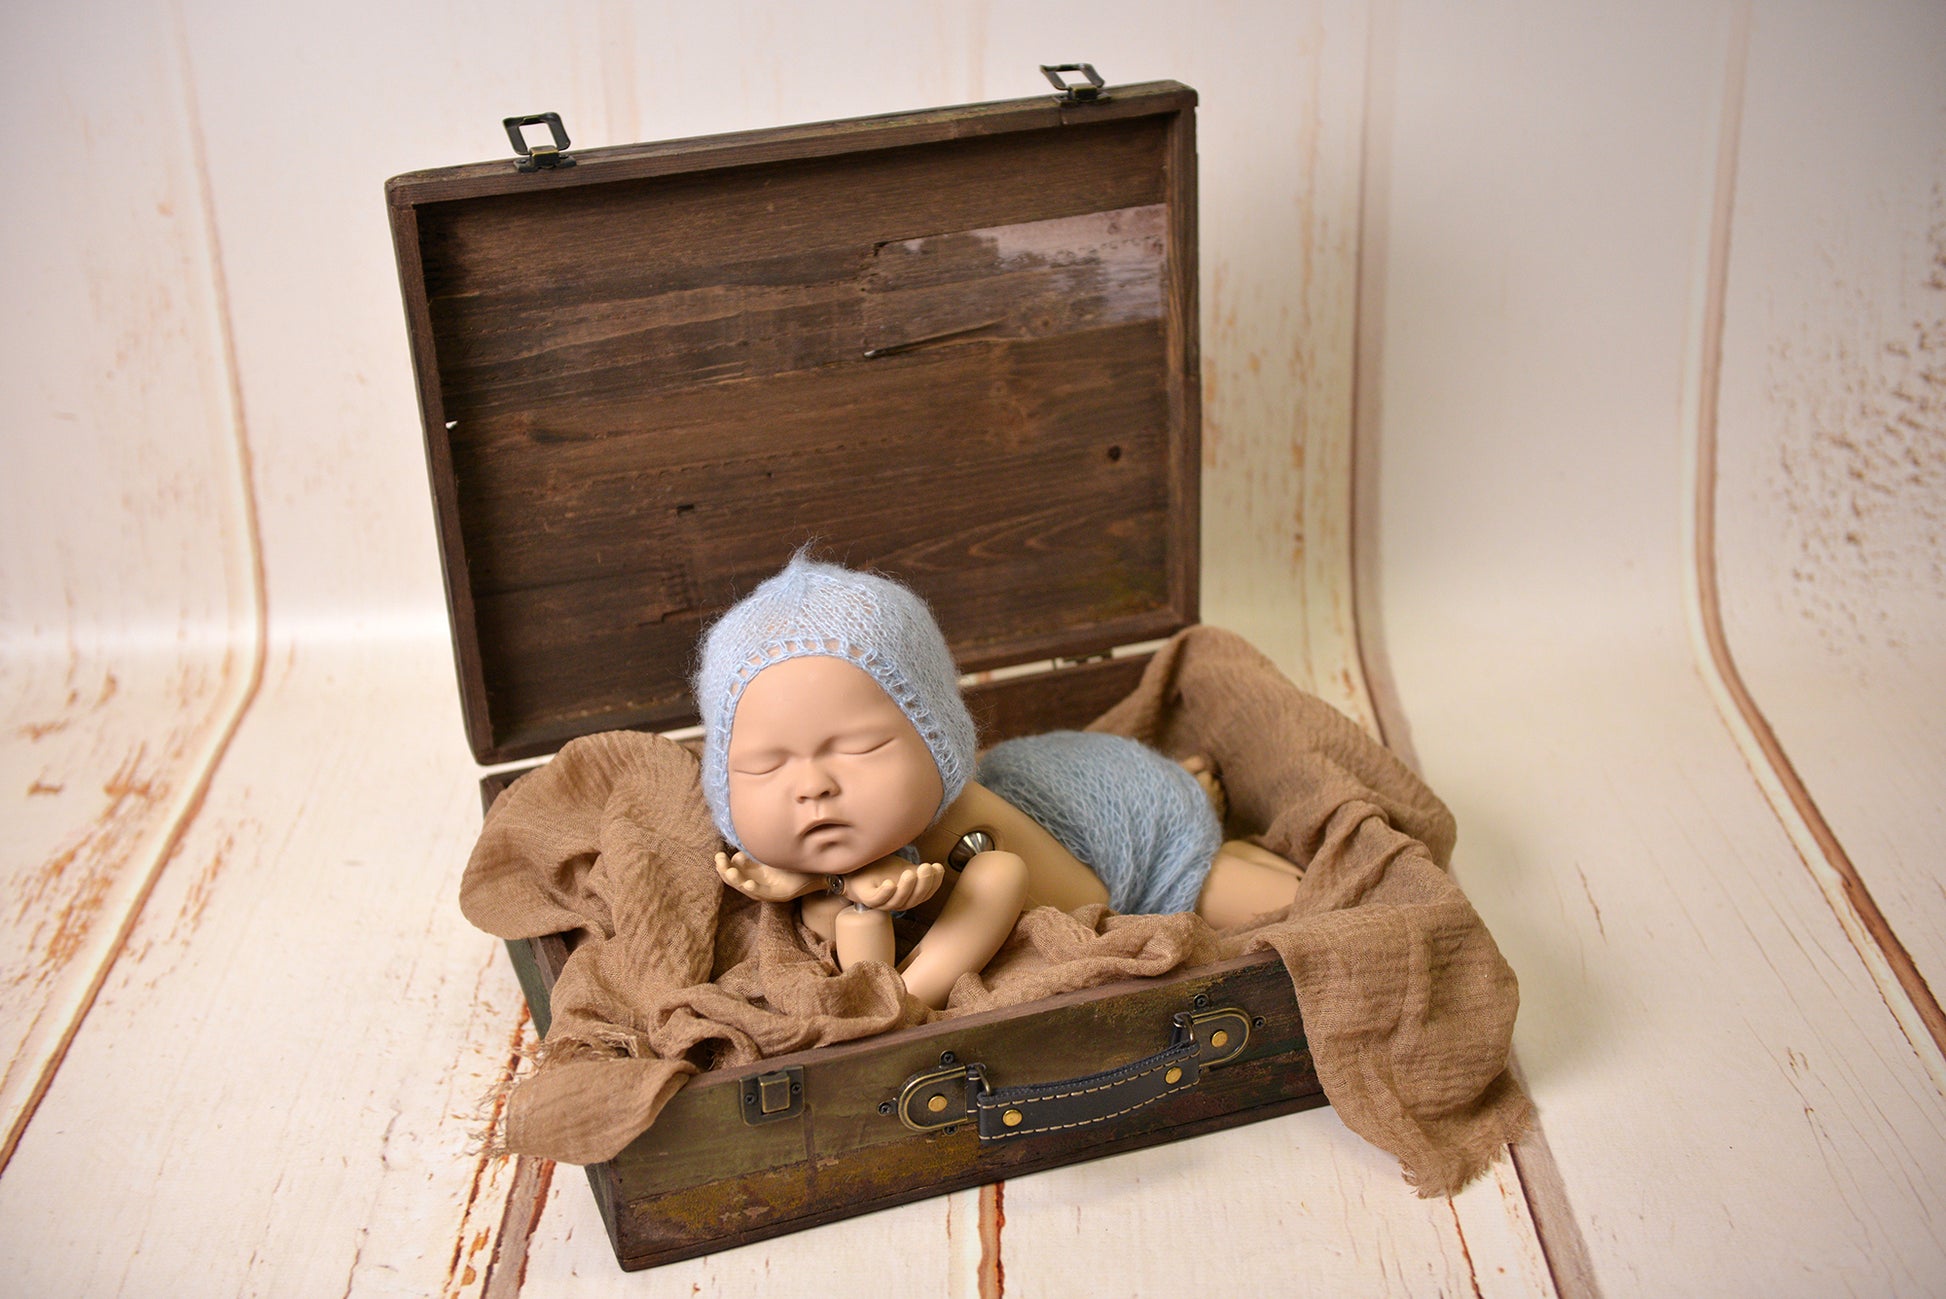 Rustic reclaimed dark wood suitcase with distressed finish and faux leather handle for charming newborn photography, perfect baby photo prop